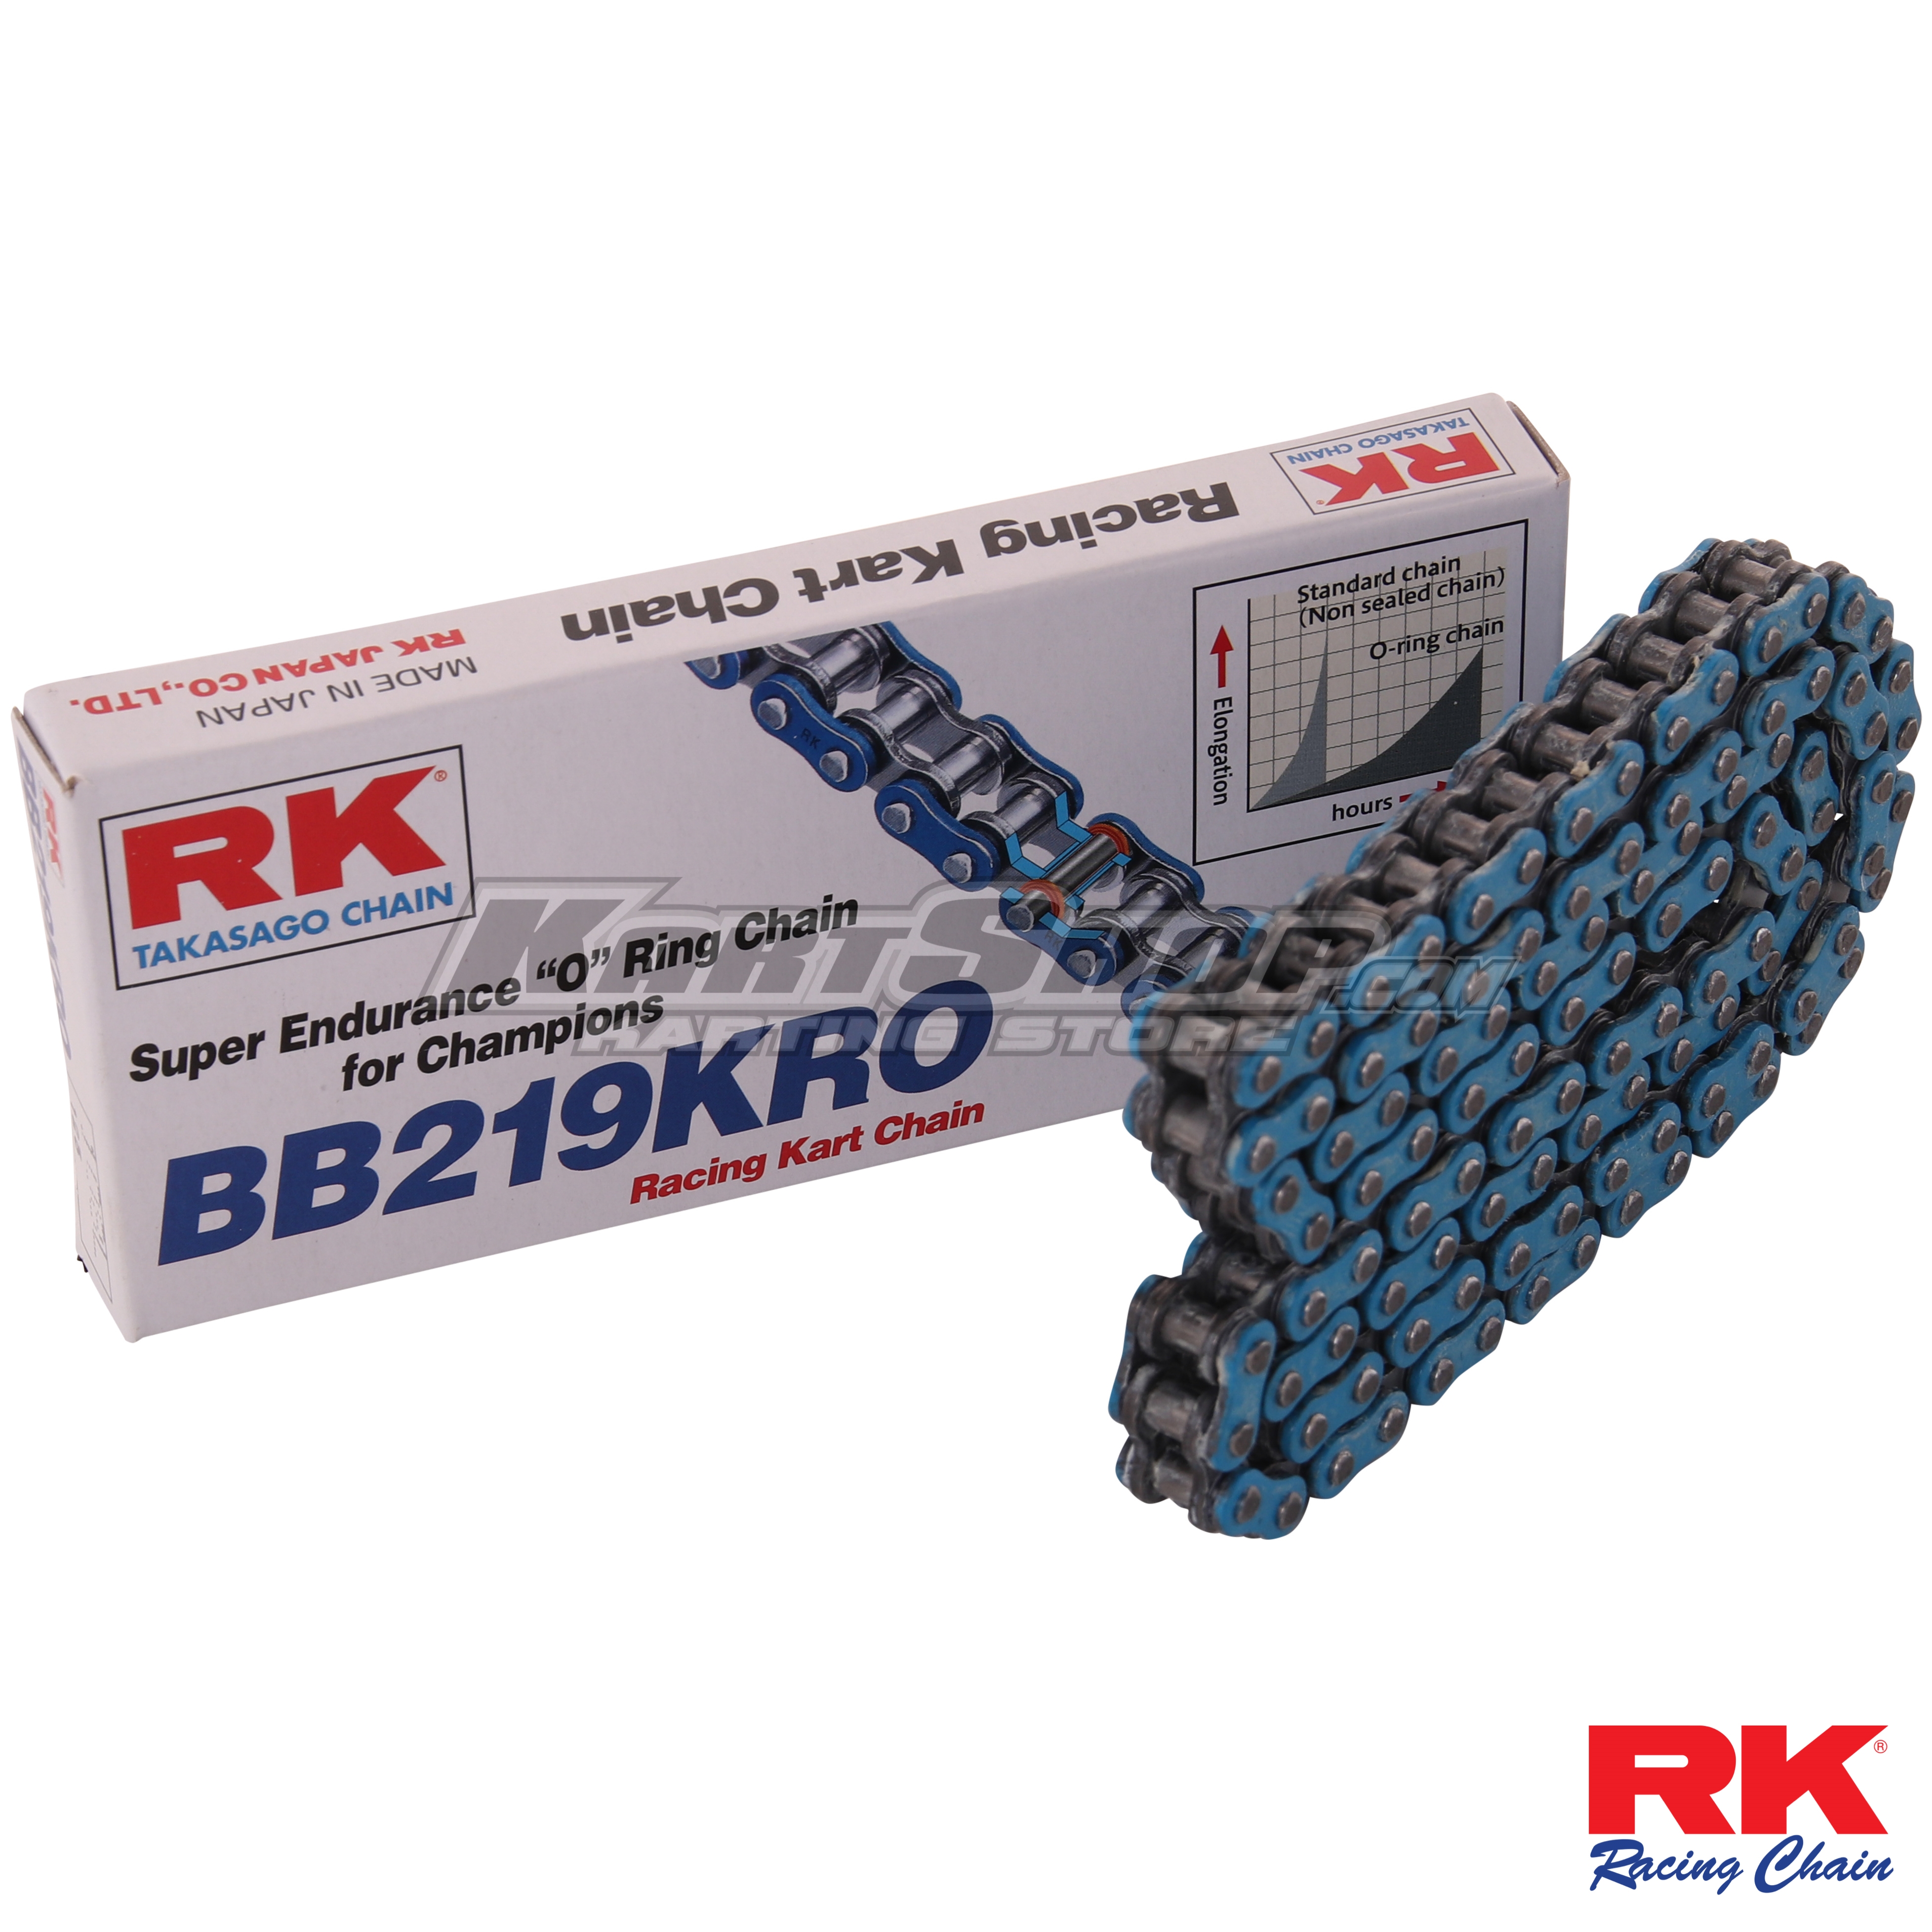 RK o-ring chain with 100 links